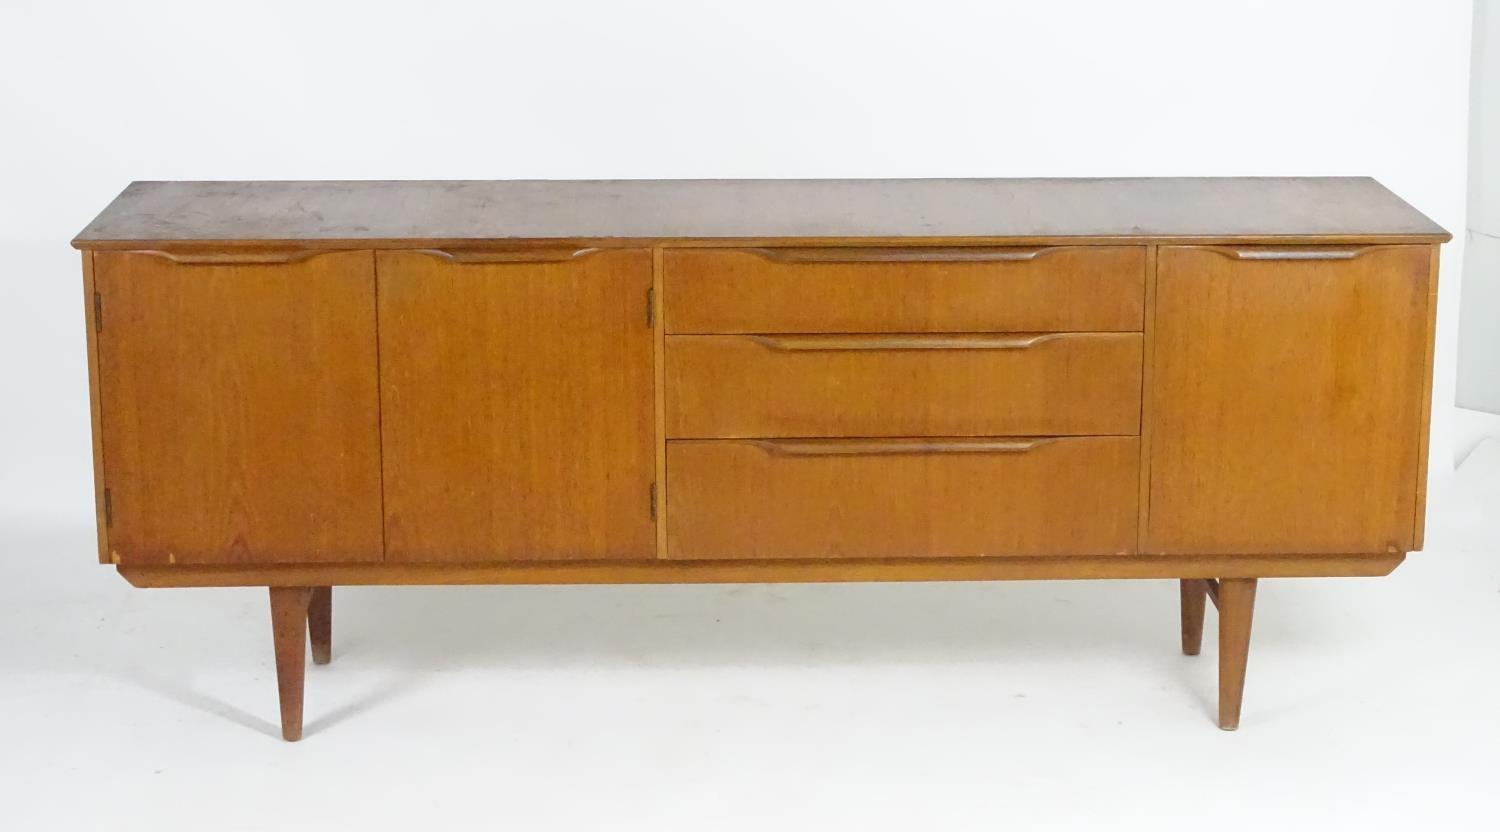 Vintage retro, mid-century: a1960s British made teak sideboard, composed of three compartments